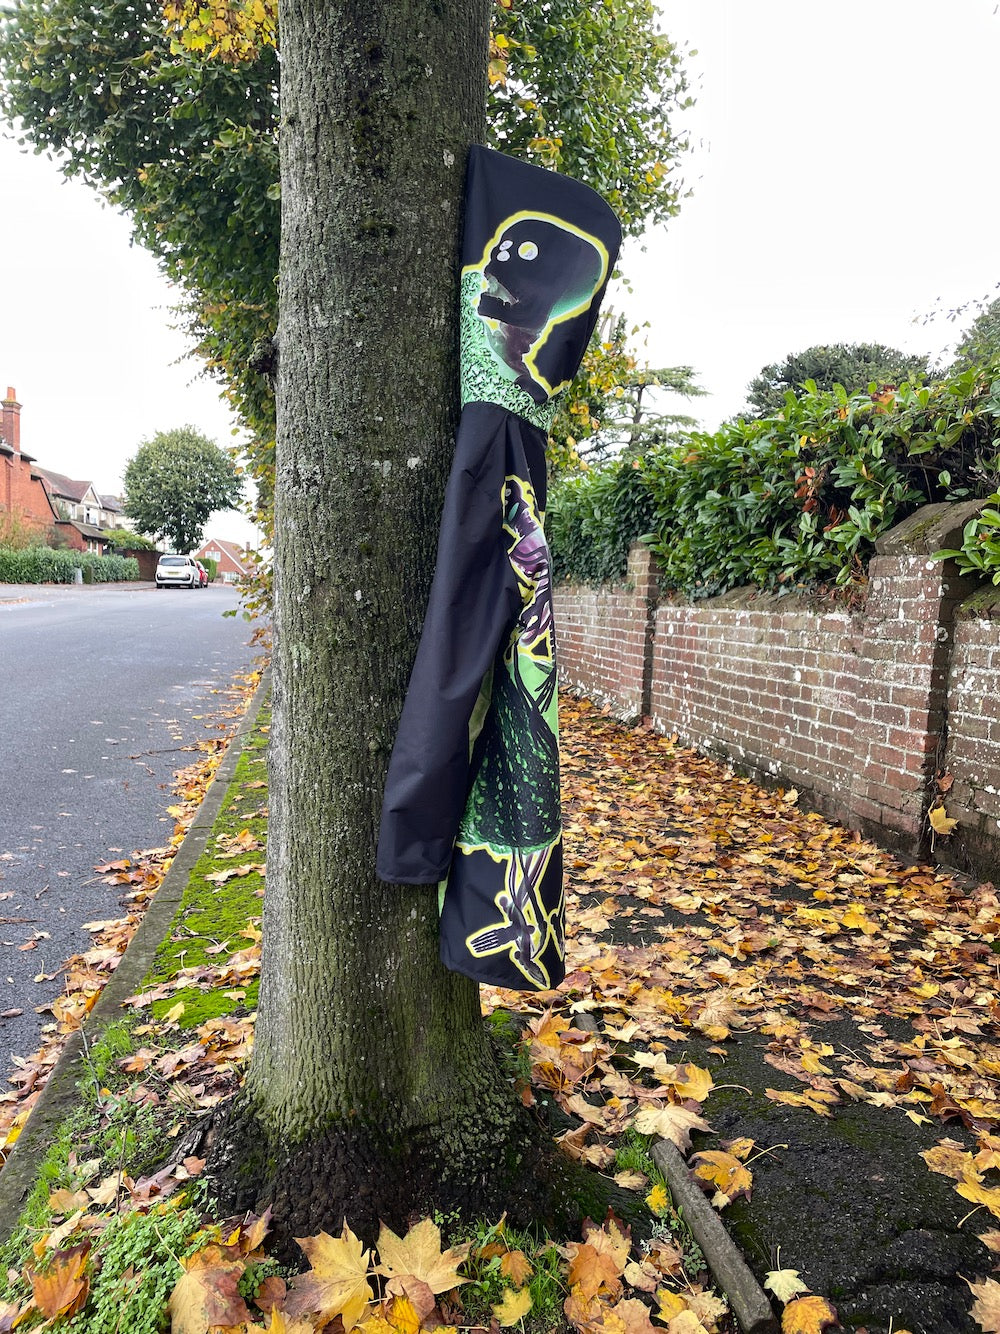 Raincoat hanging from a nobble on a tree